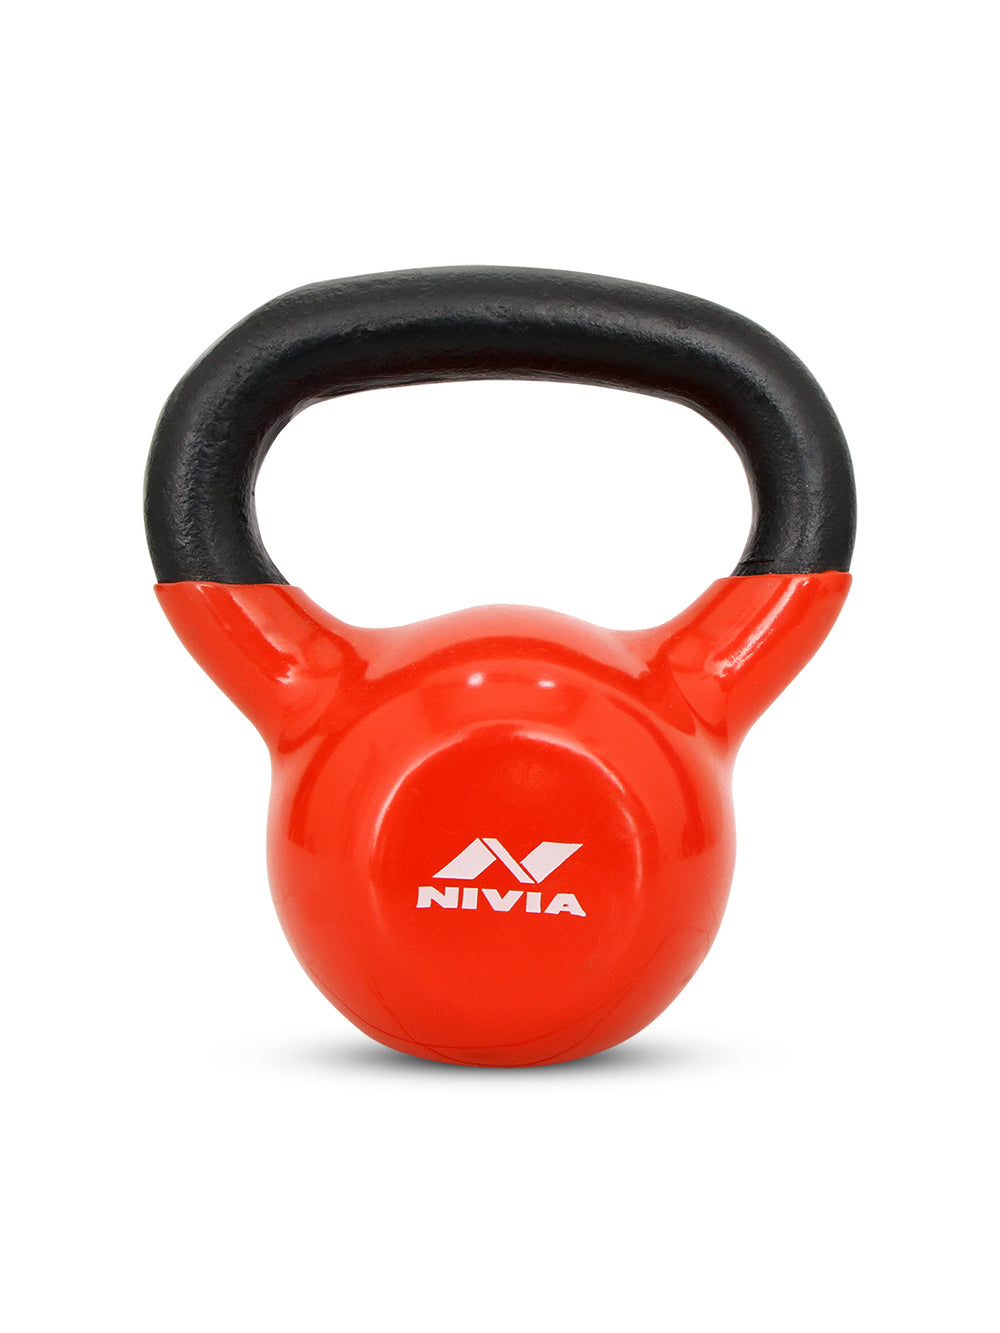 Buy BABA SPORTS Kettlebell, 10Kg Kettle Bell, Cast Iron Kettlebell,  Kettlebells Weight, Kettlebells for Home Gym Online at Low Prices in India  